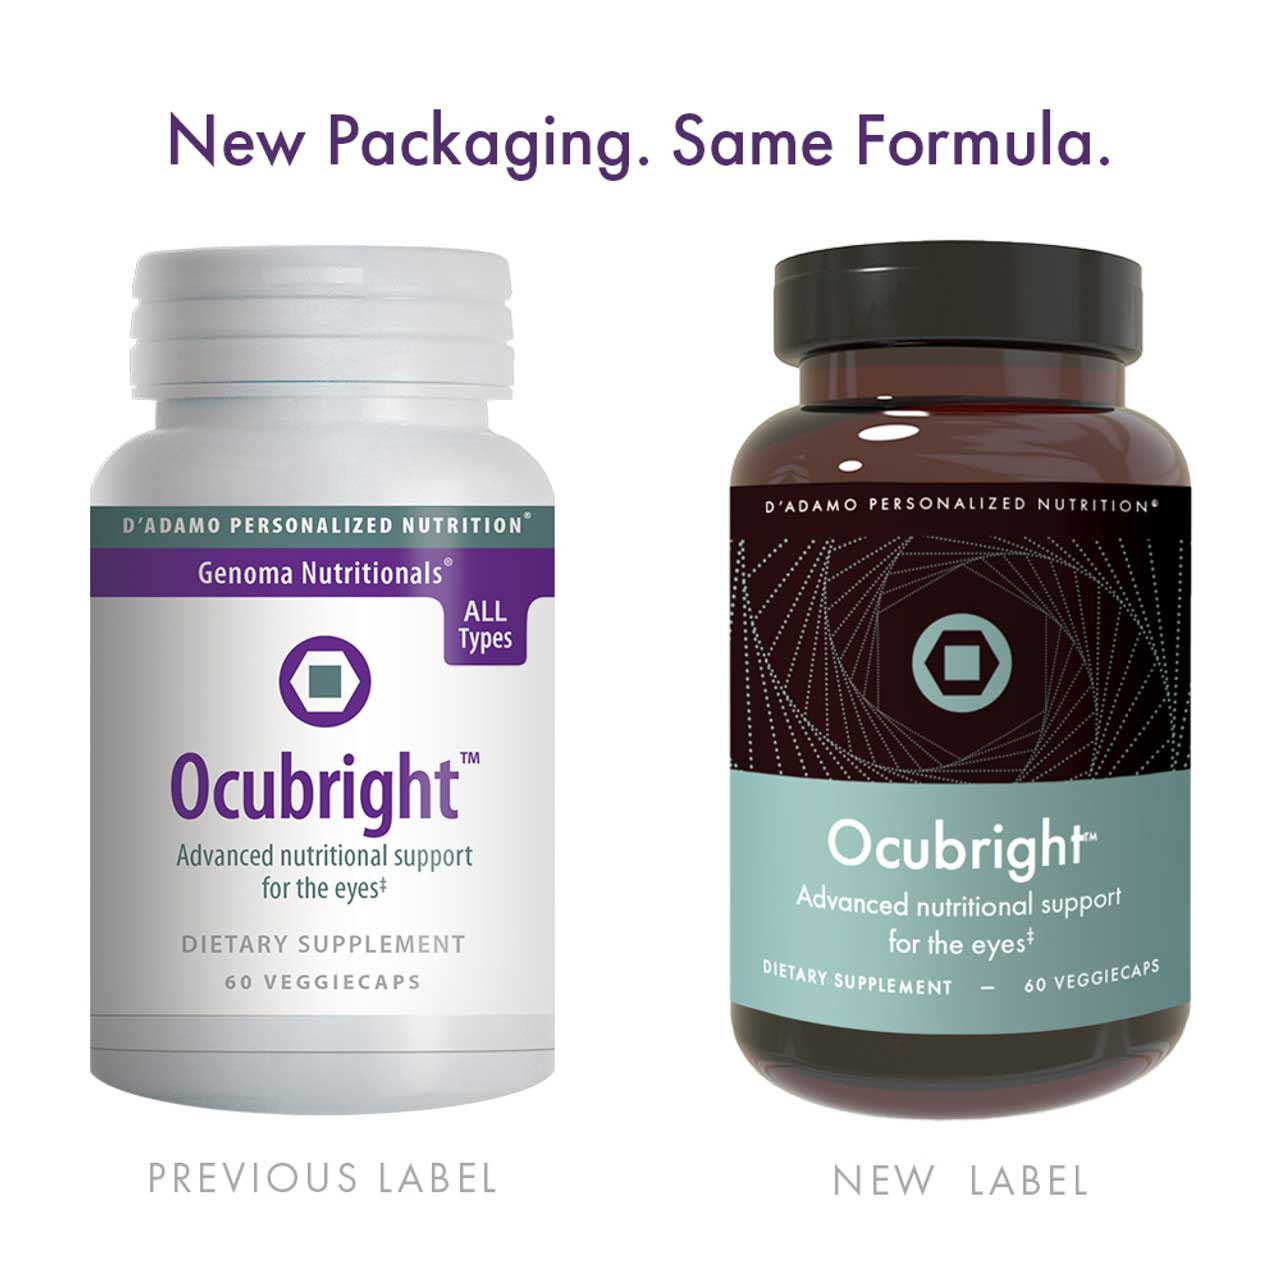 D'Adamo Personalized Nutrition Ocubright New Label